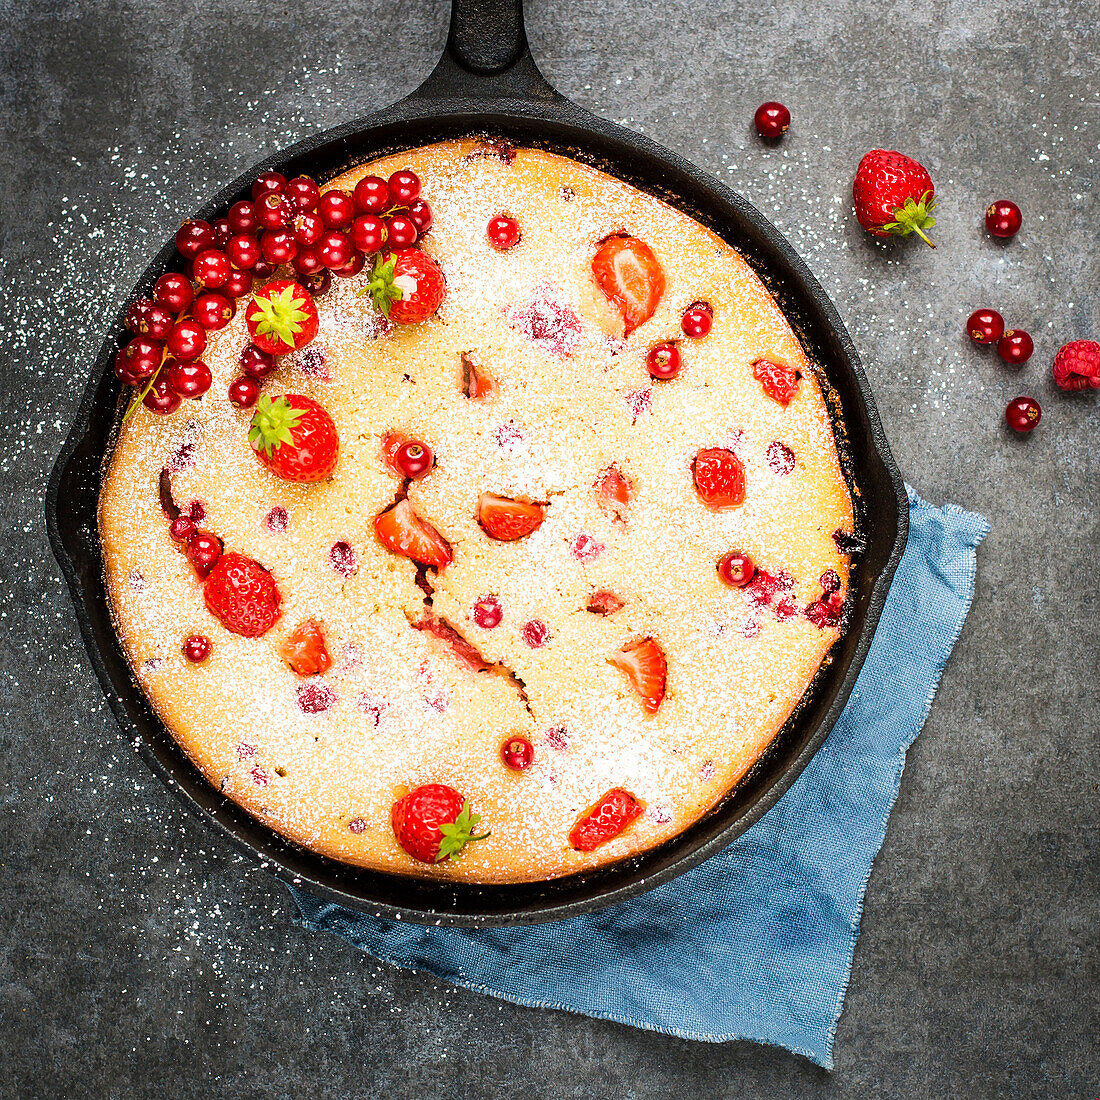 Cast Iron skillet gluten free cake with red berries